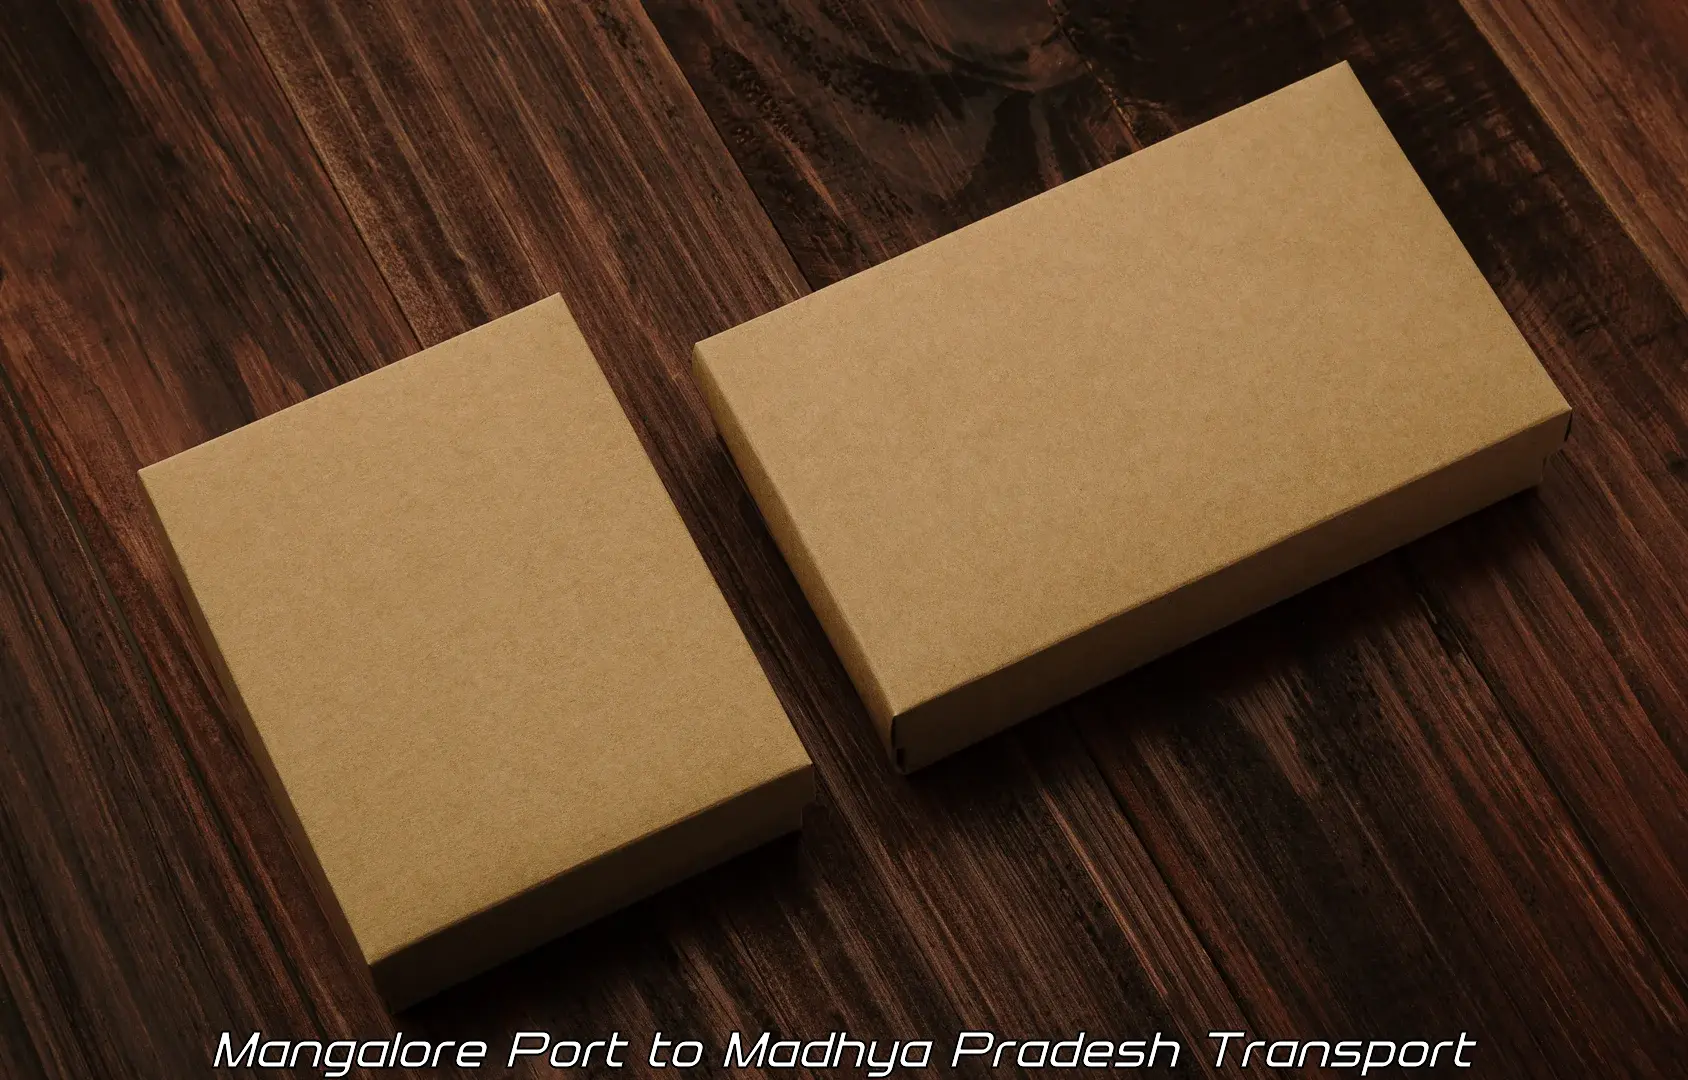 Commercial transport service Mangalore Port to Balaghat